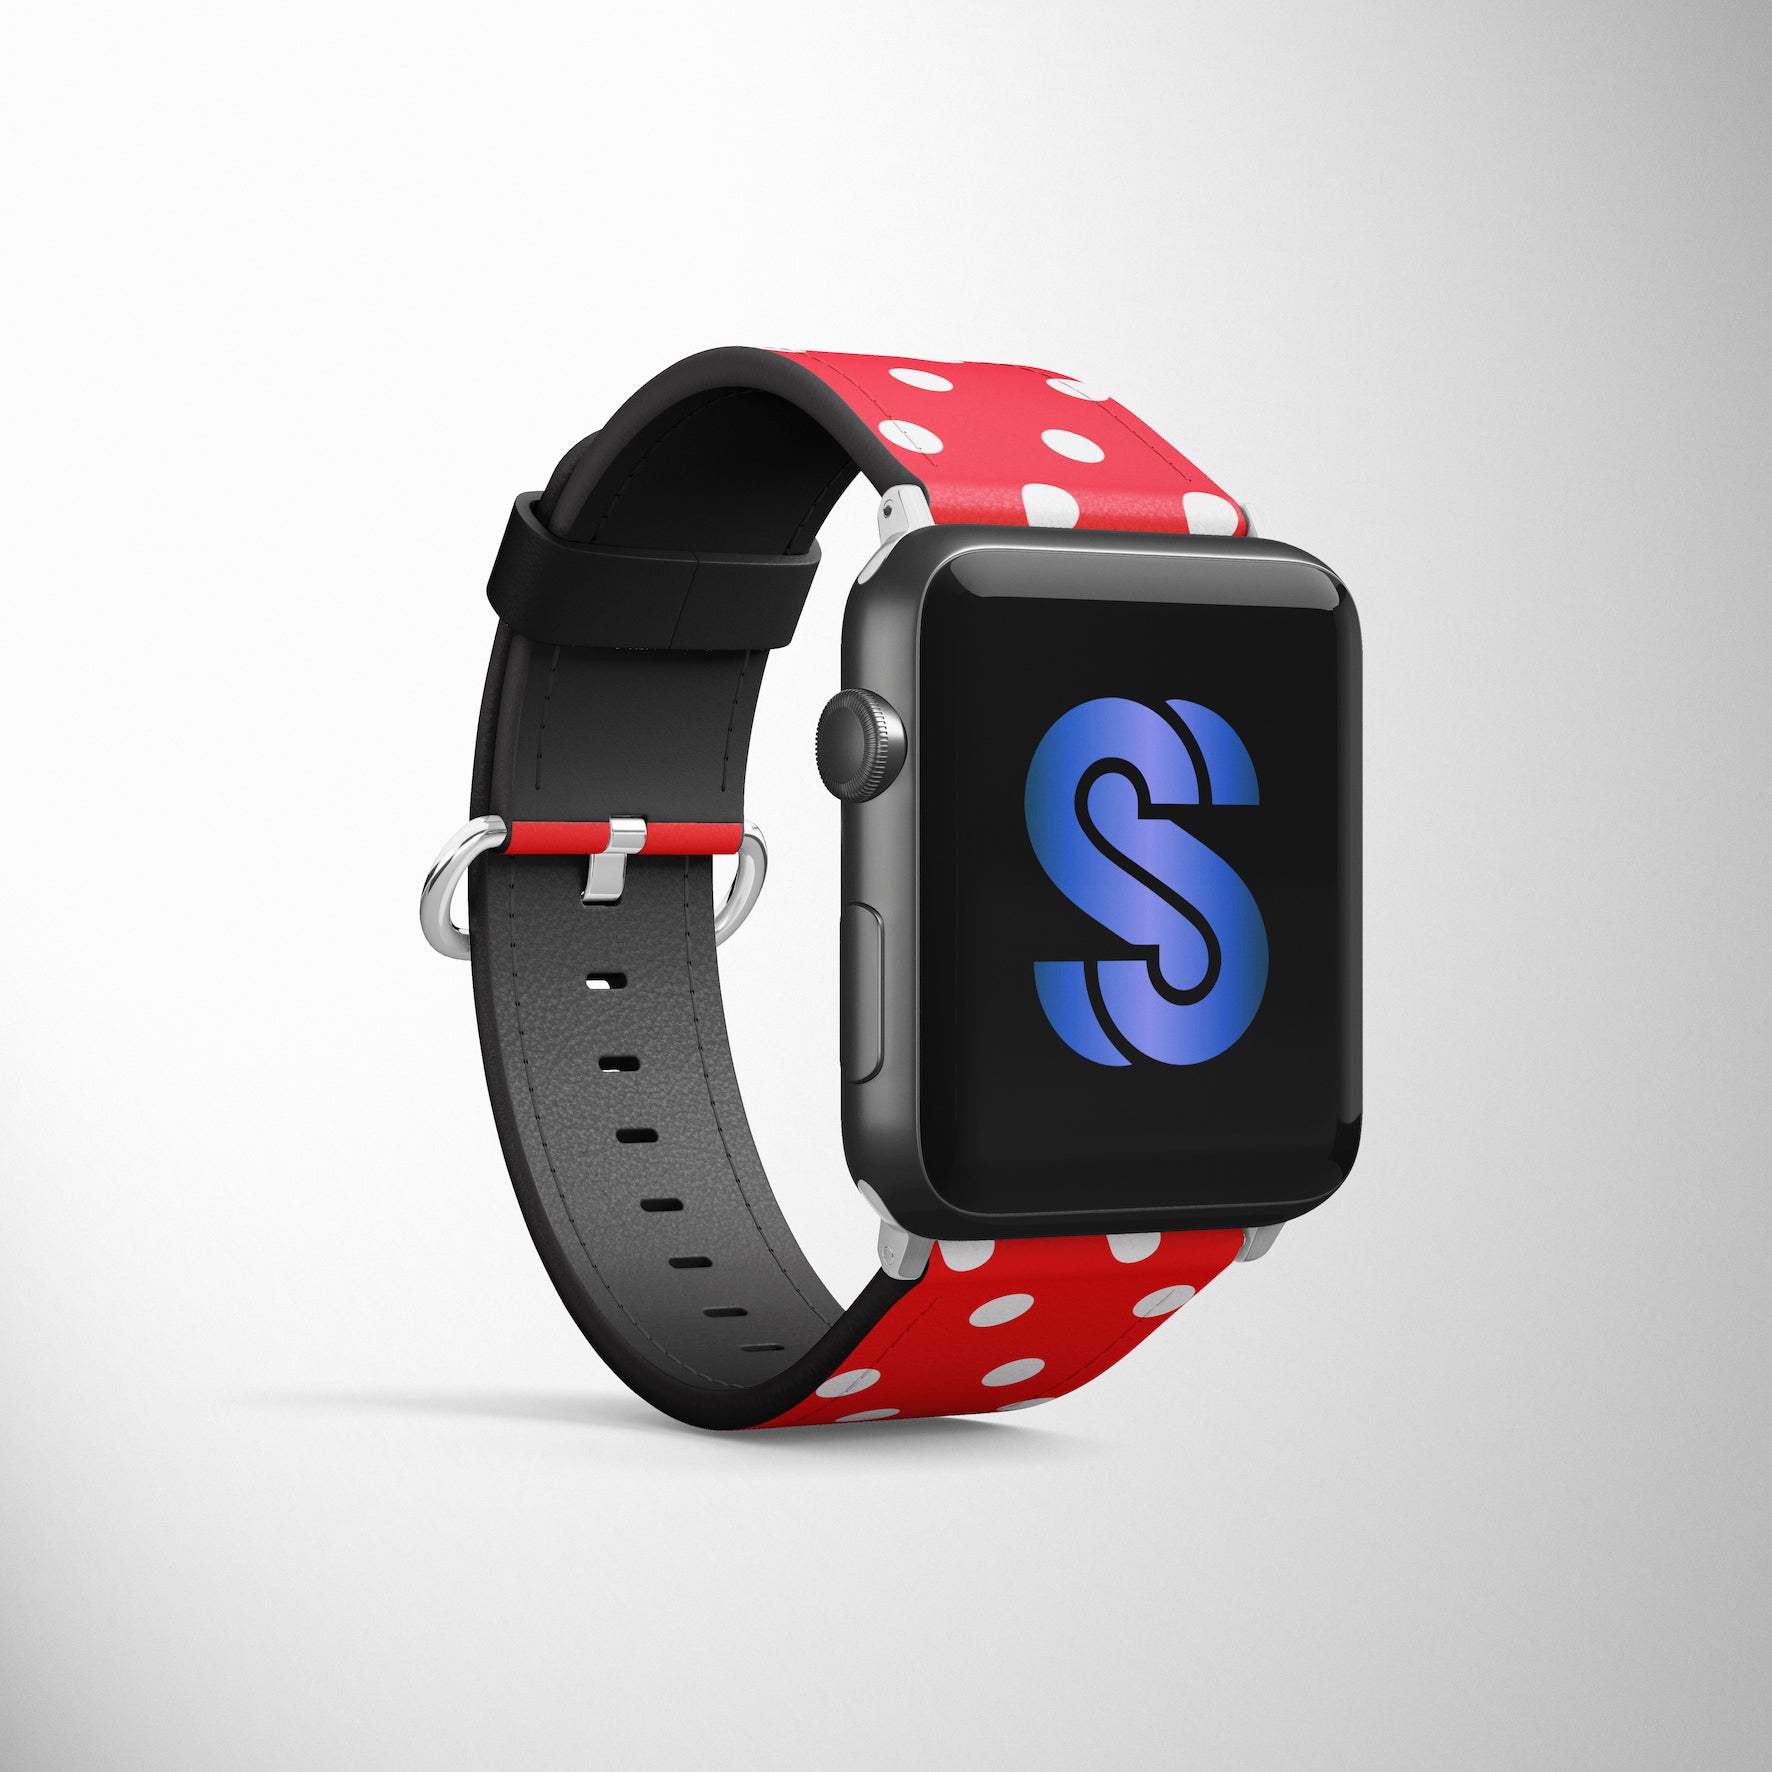 Red & White Polka Dot Faux Leather Apple Watch Band for Apple Watch 1,2,3,4,5,6,SE - www.scottsy.com